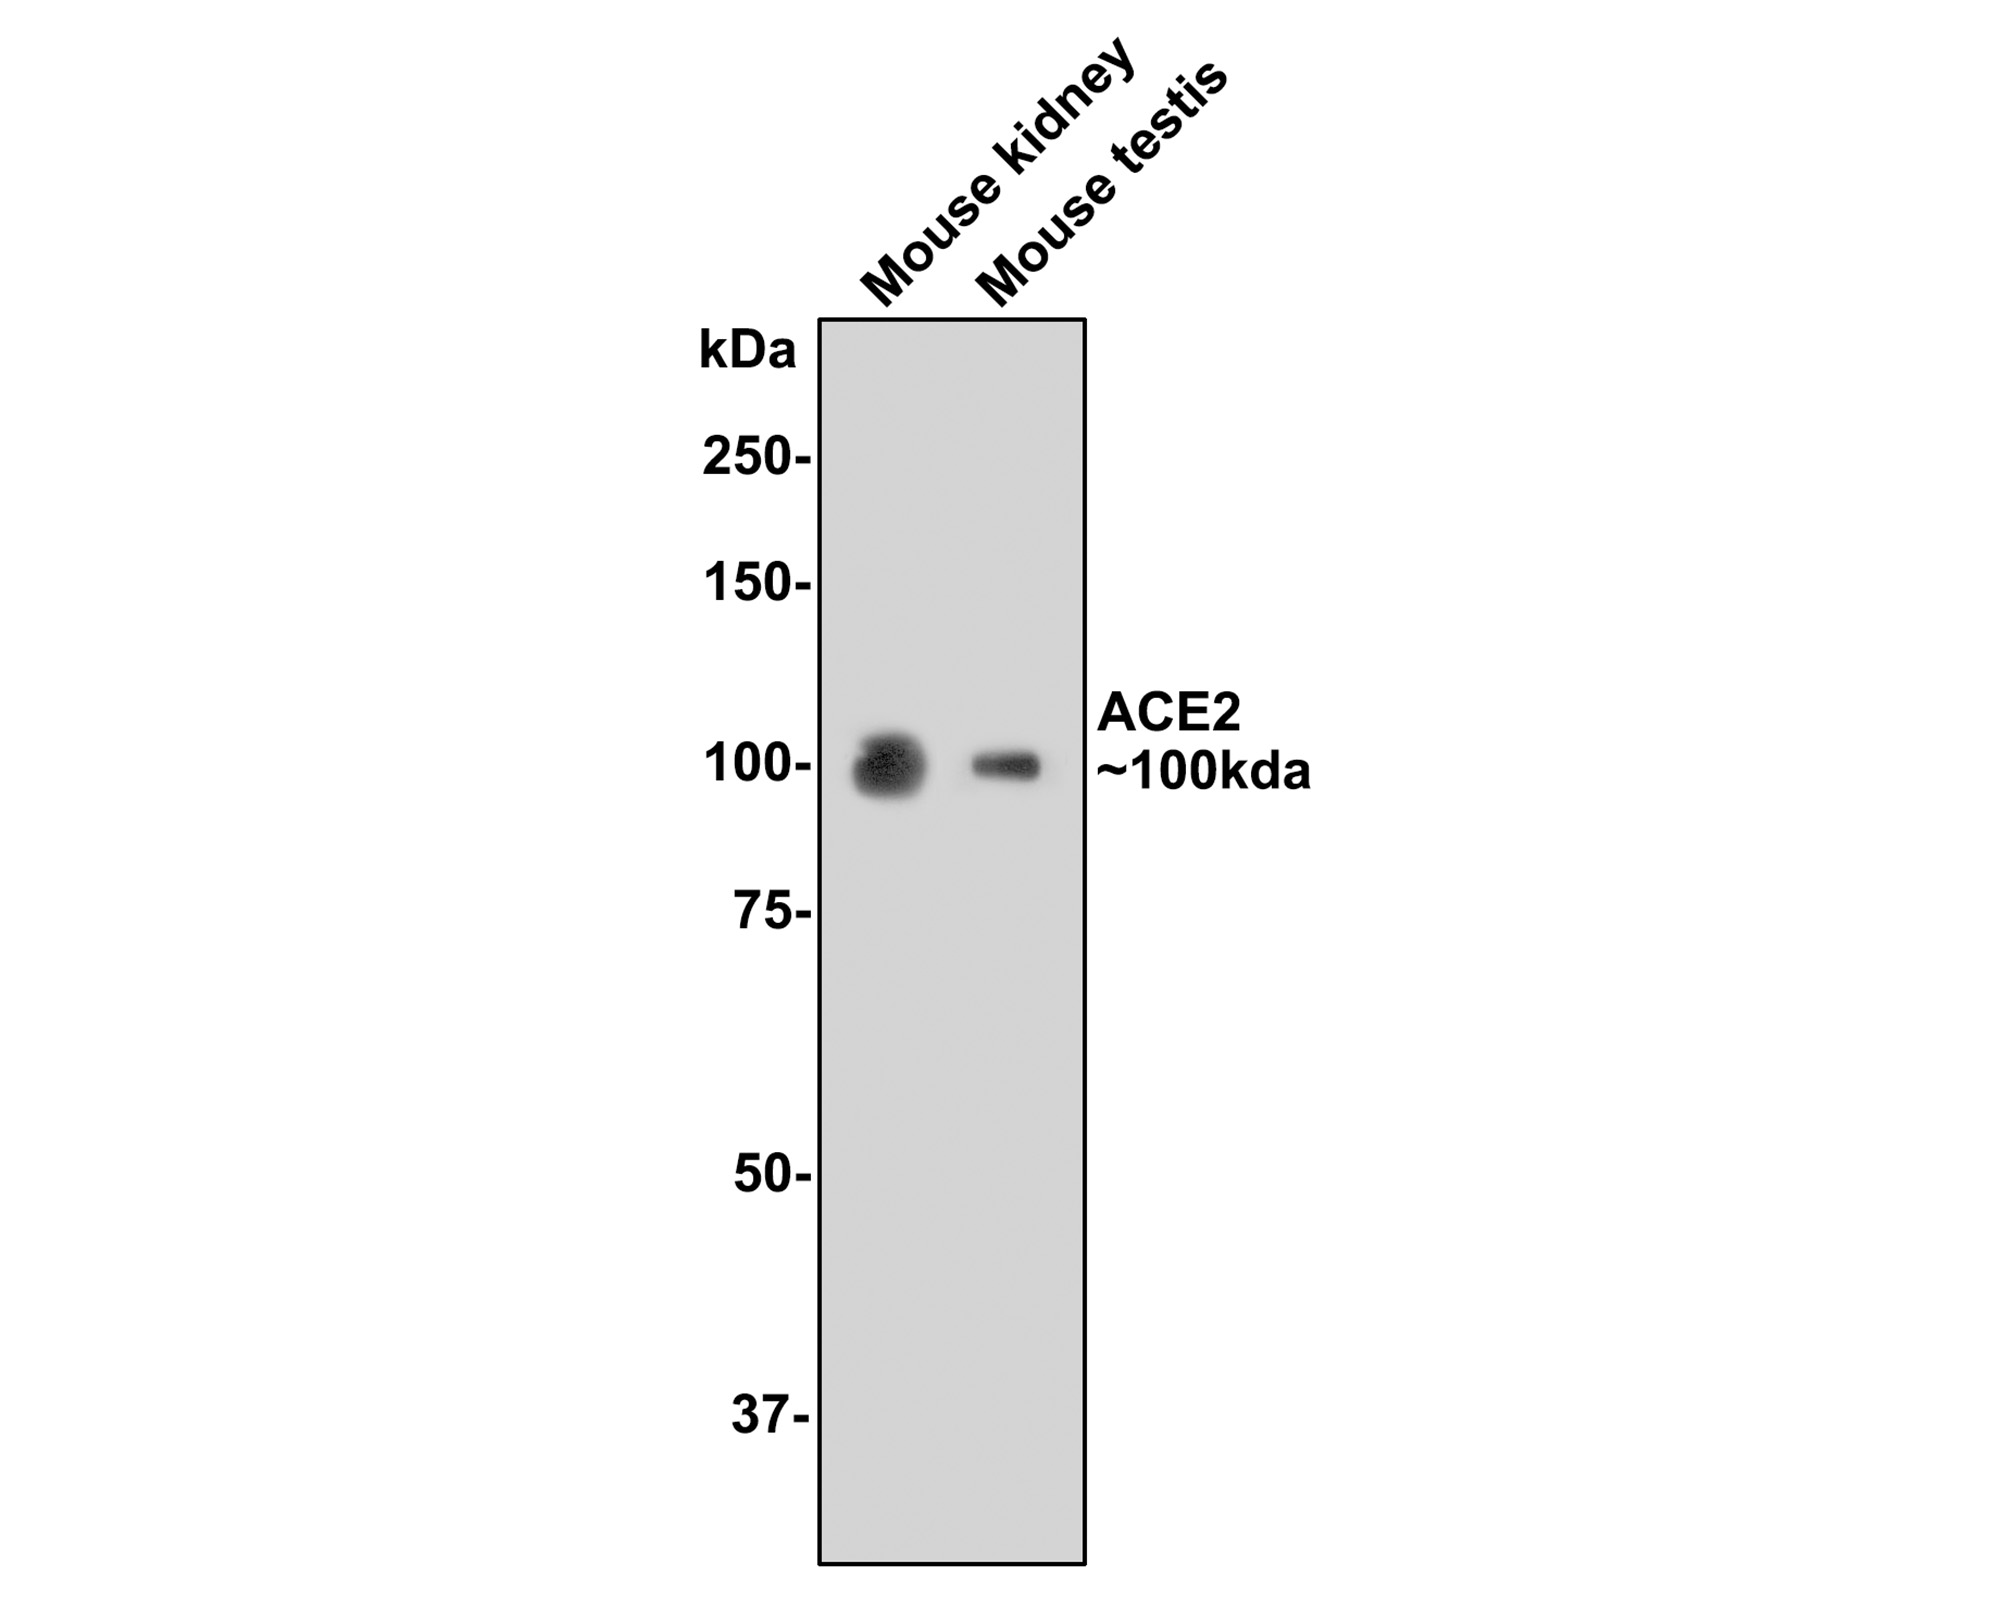 Western blot analysis of ACE2 on Hamster testis (1) and stomach (2) tissue lysates using anti-ACE2 antibody at 1/1,000 dilution.